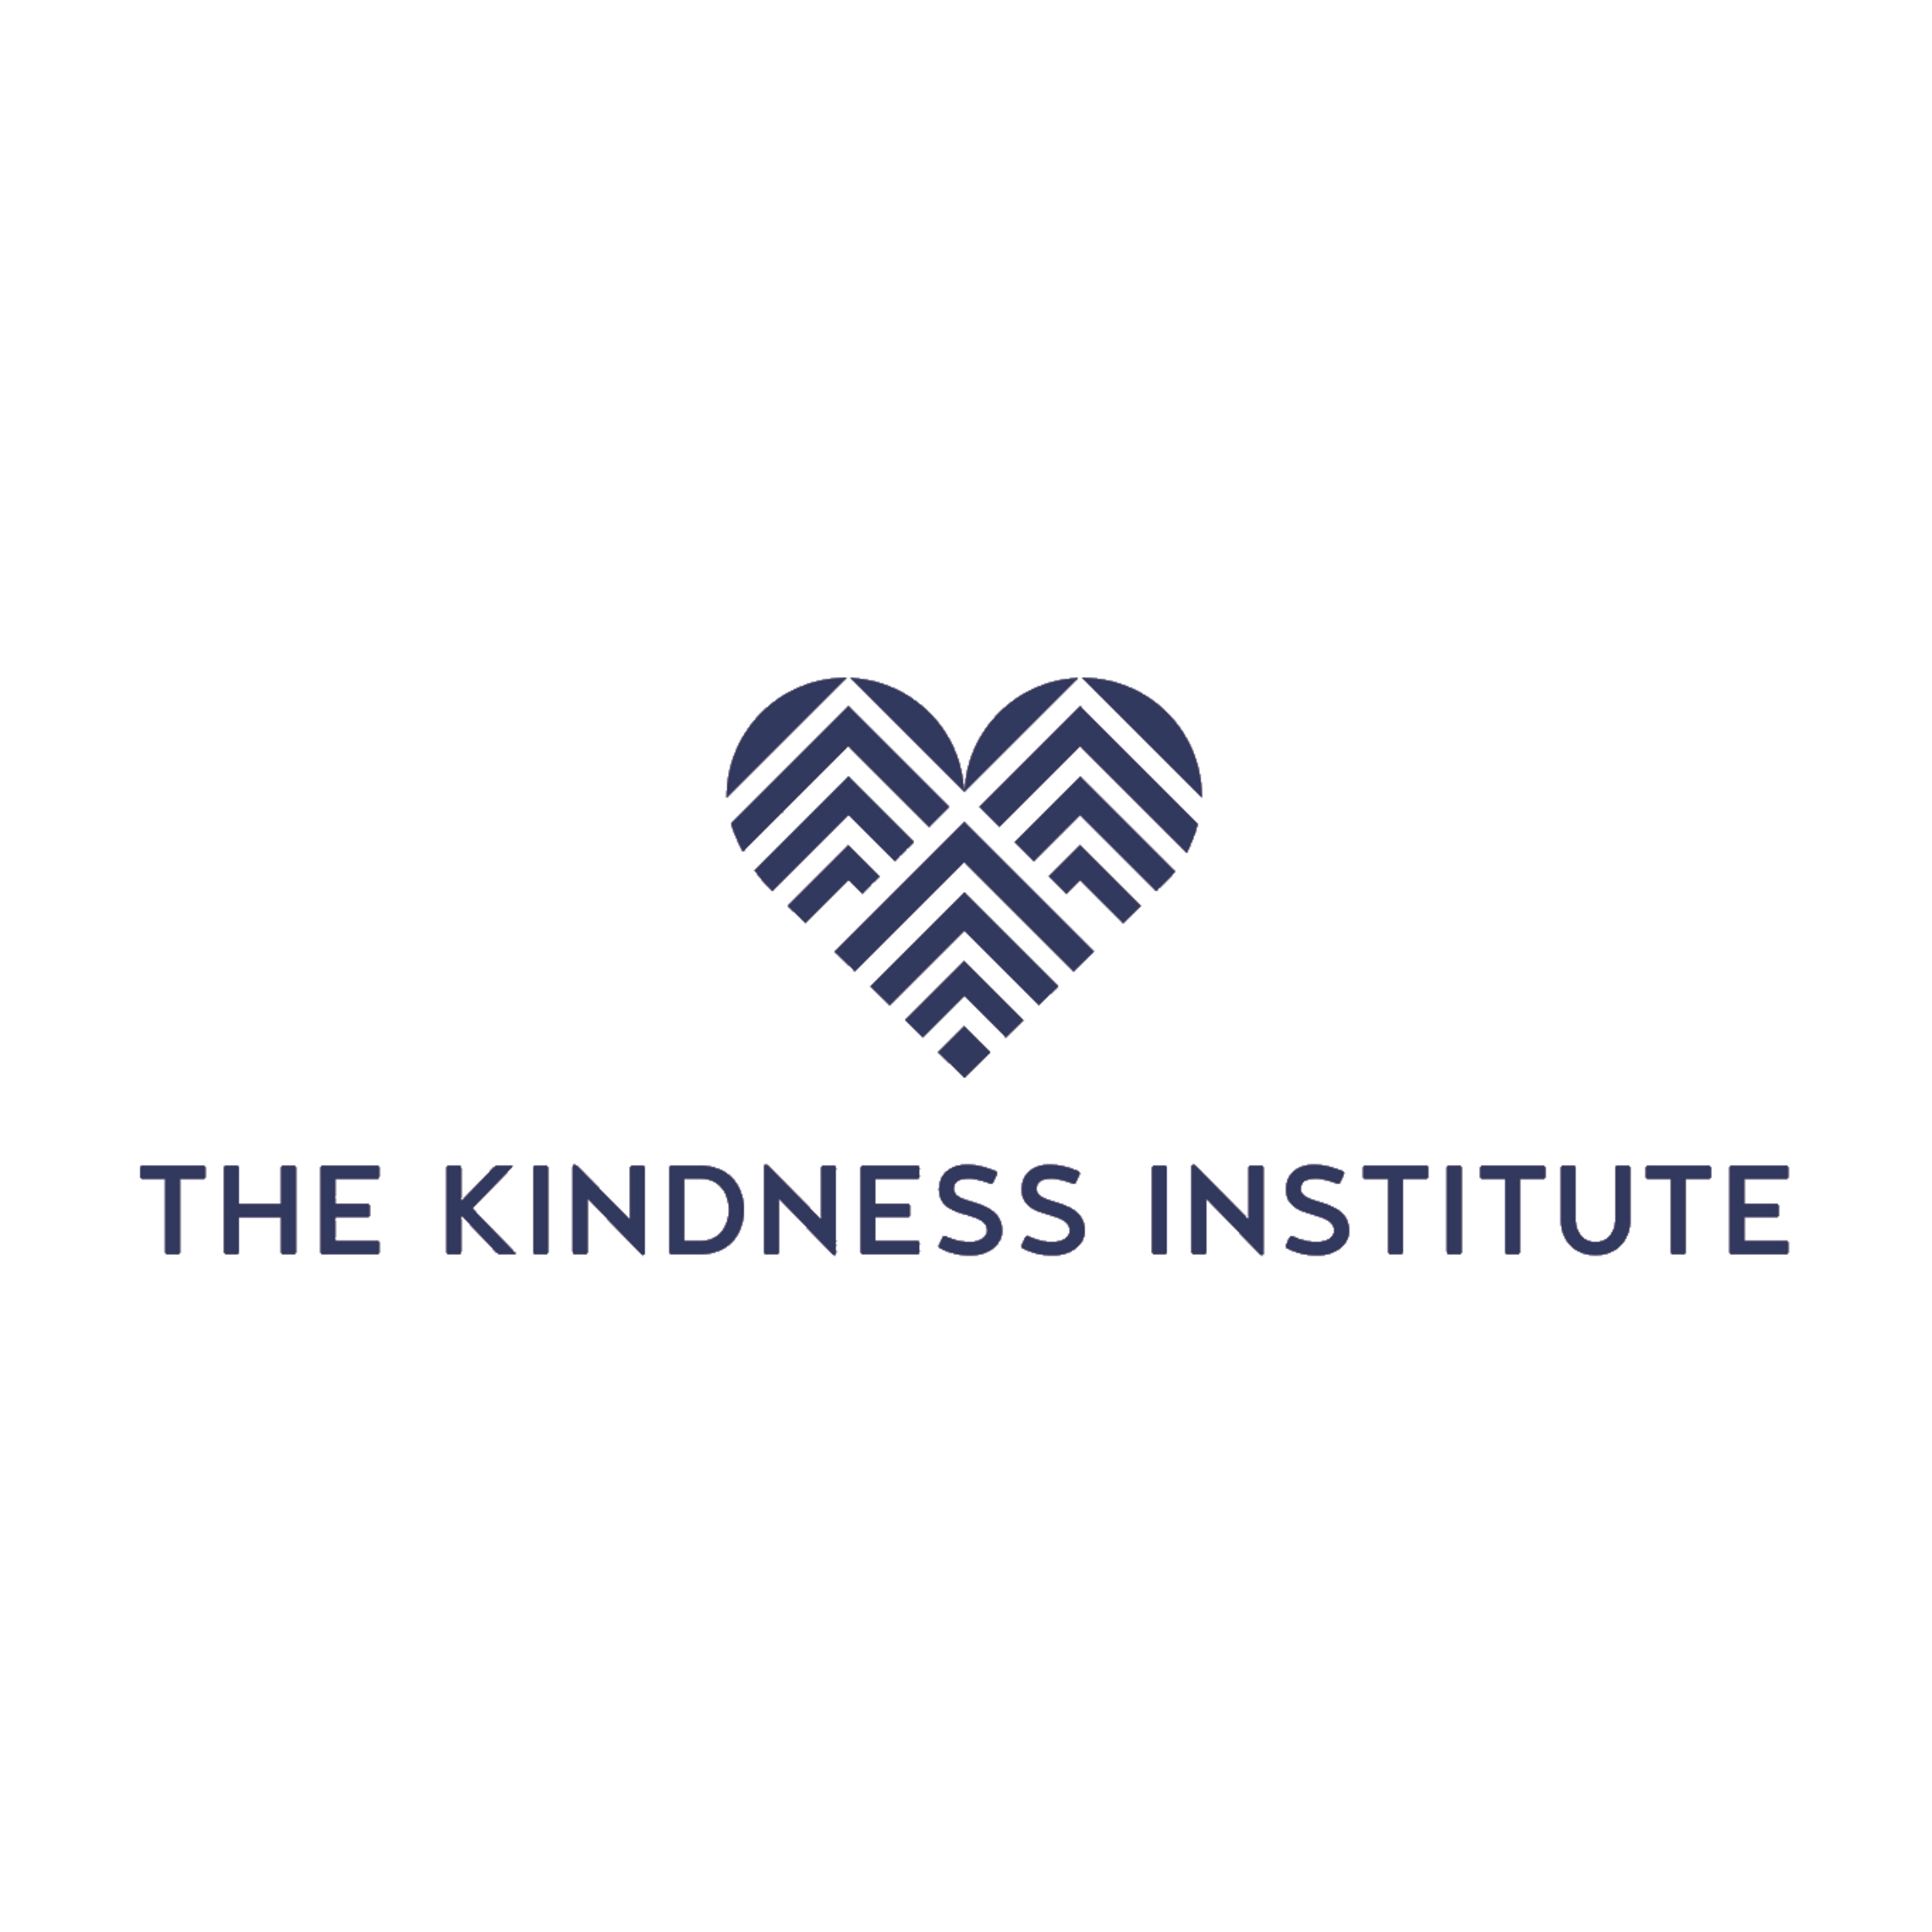 The Kindness Institute logo